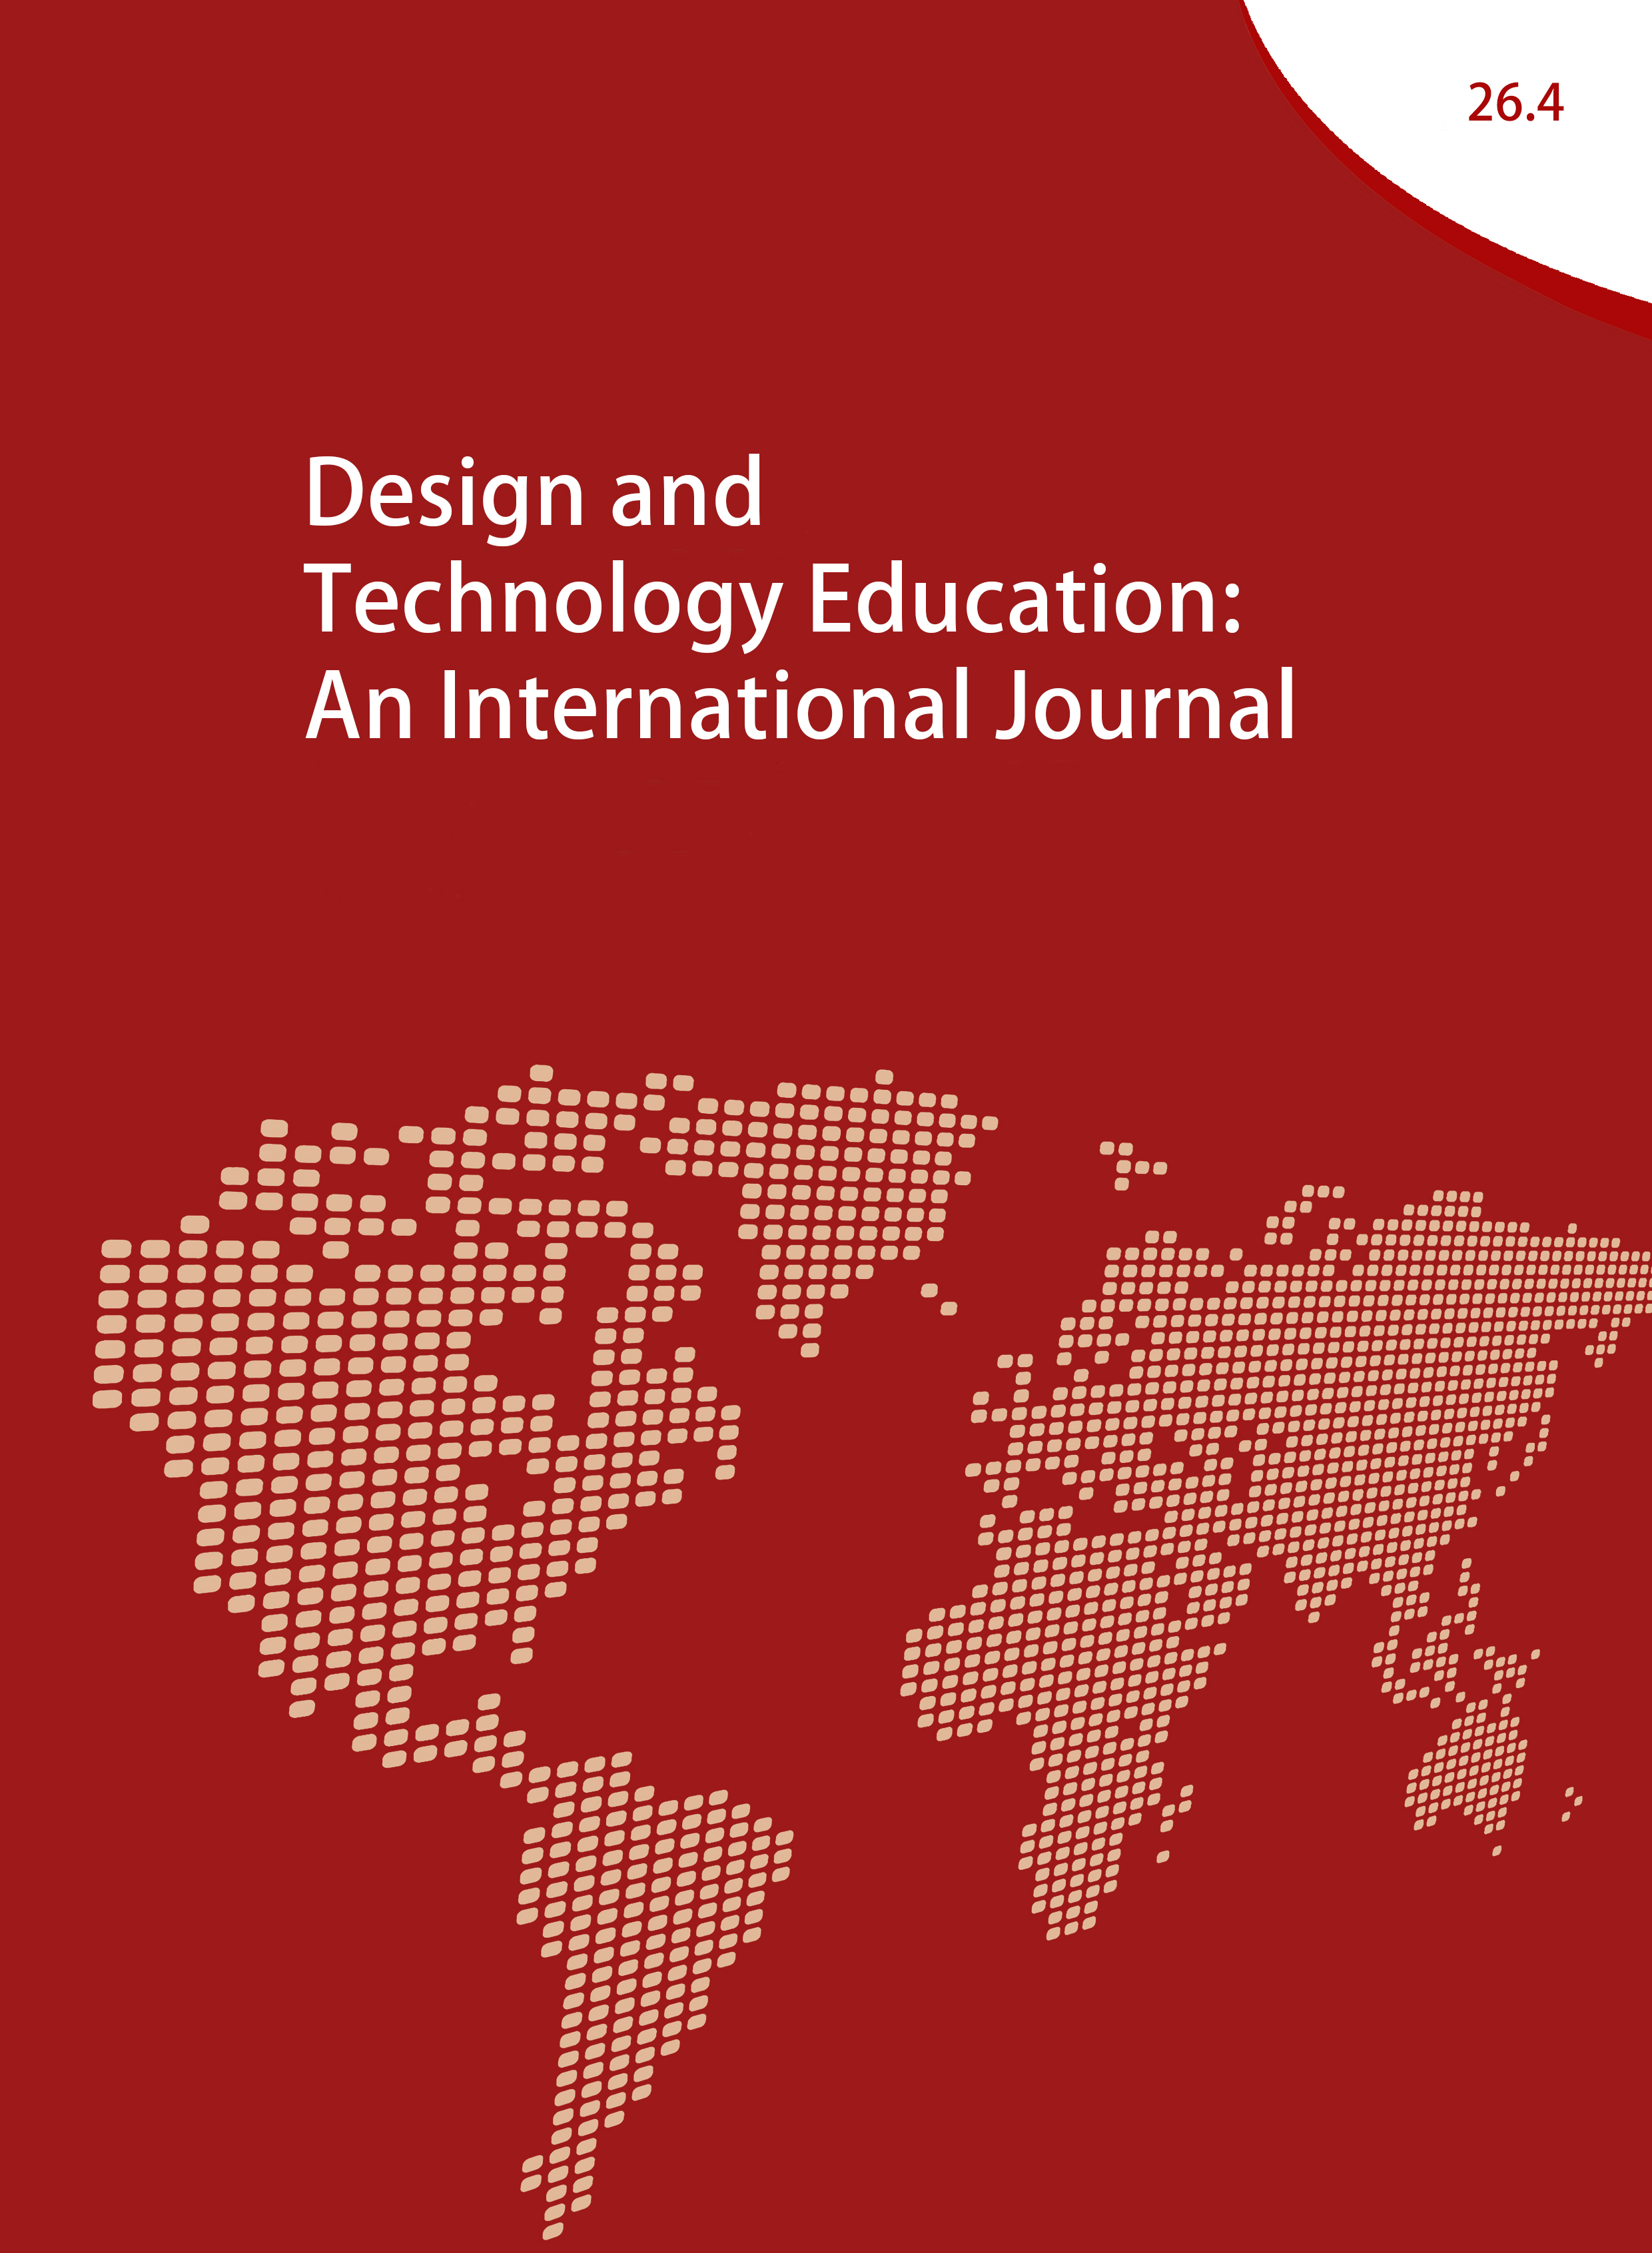 					View Vol. 26 No. 4 (2021): Design and Technology Education: An International Journal. Special Issue, December 2021
				